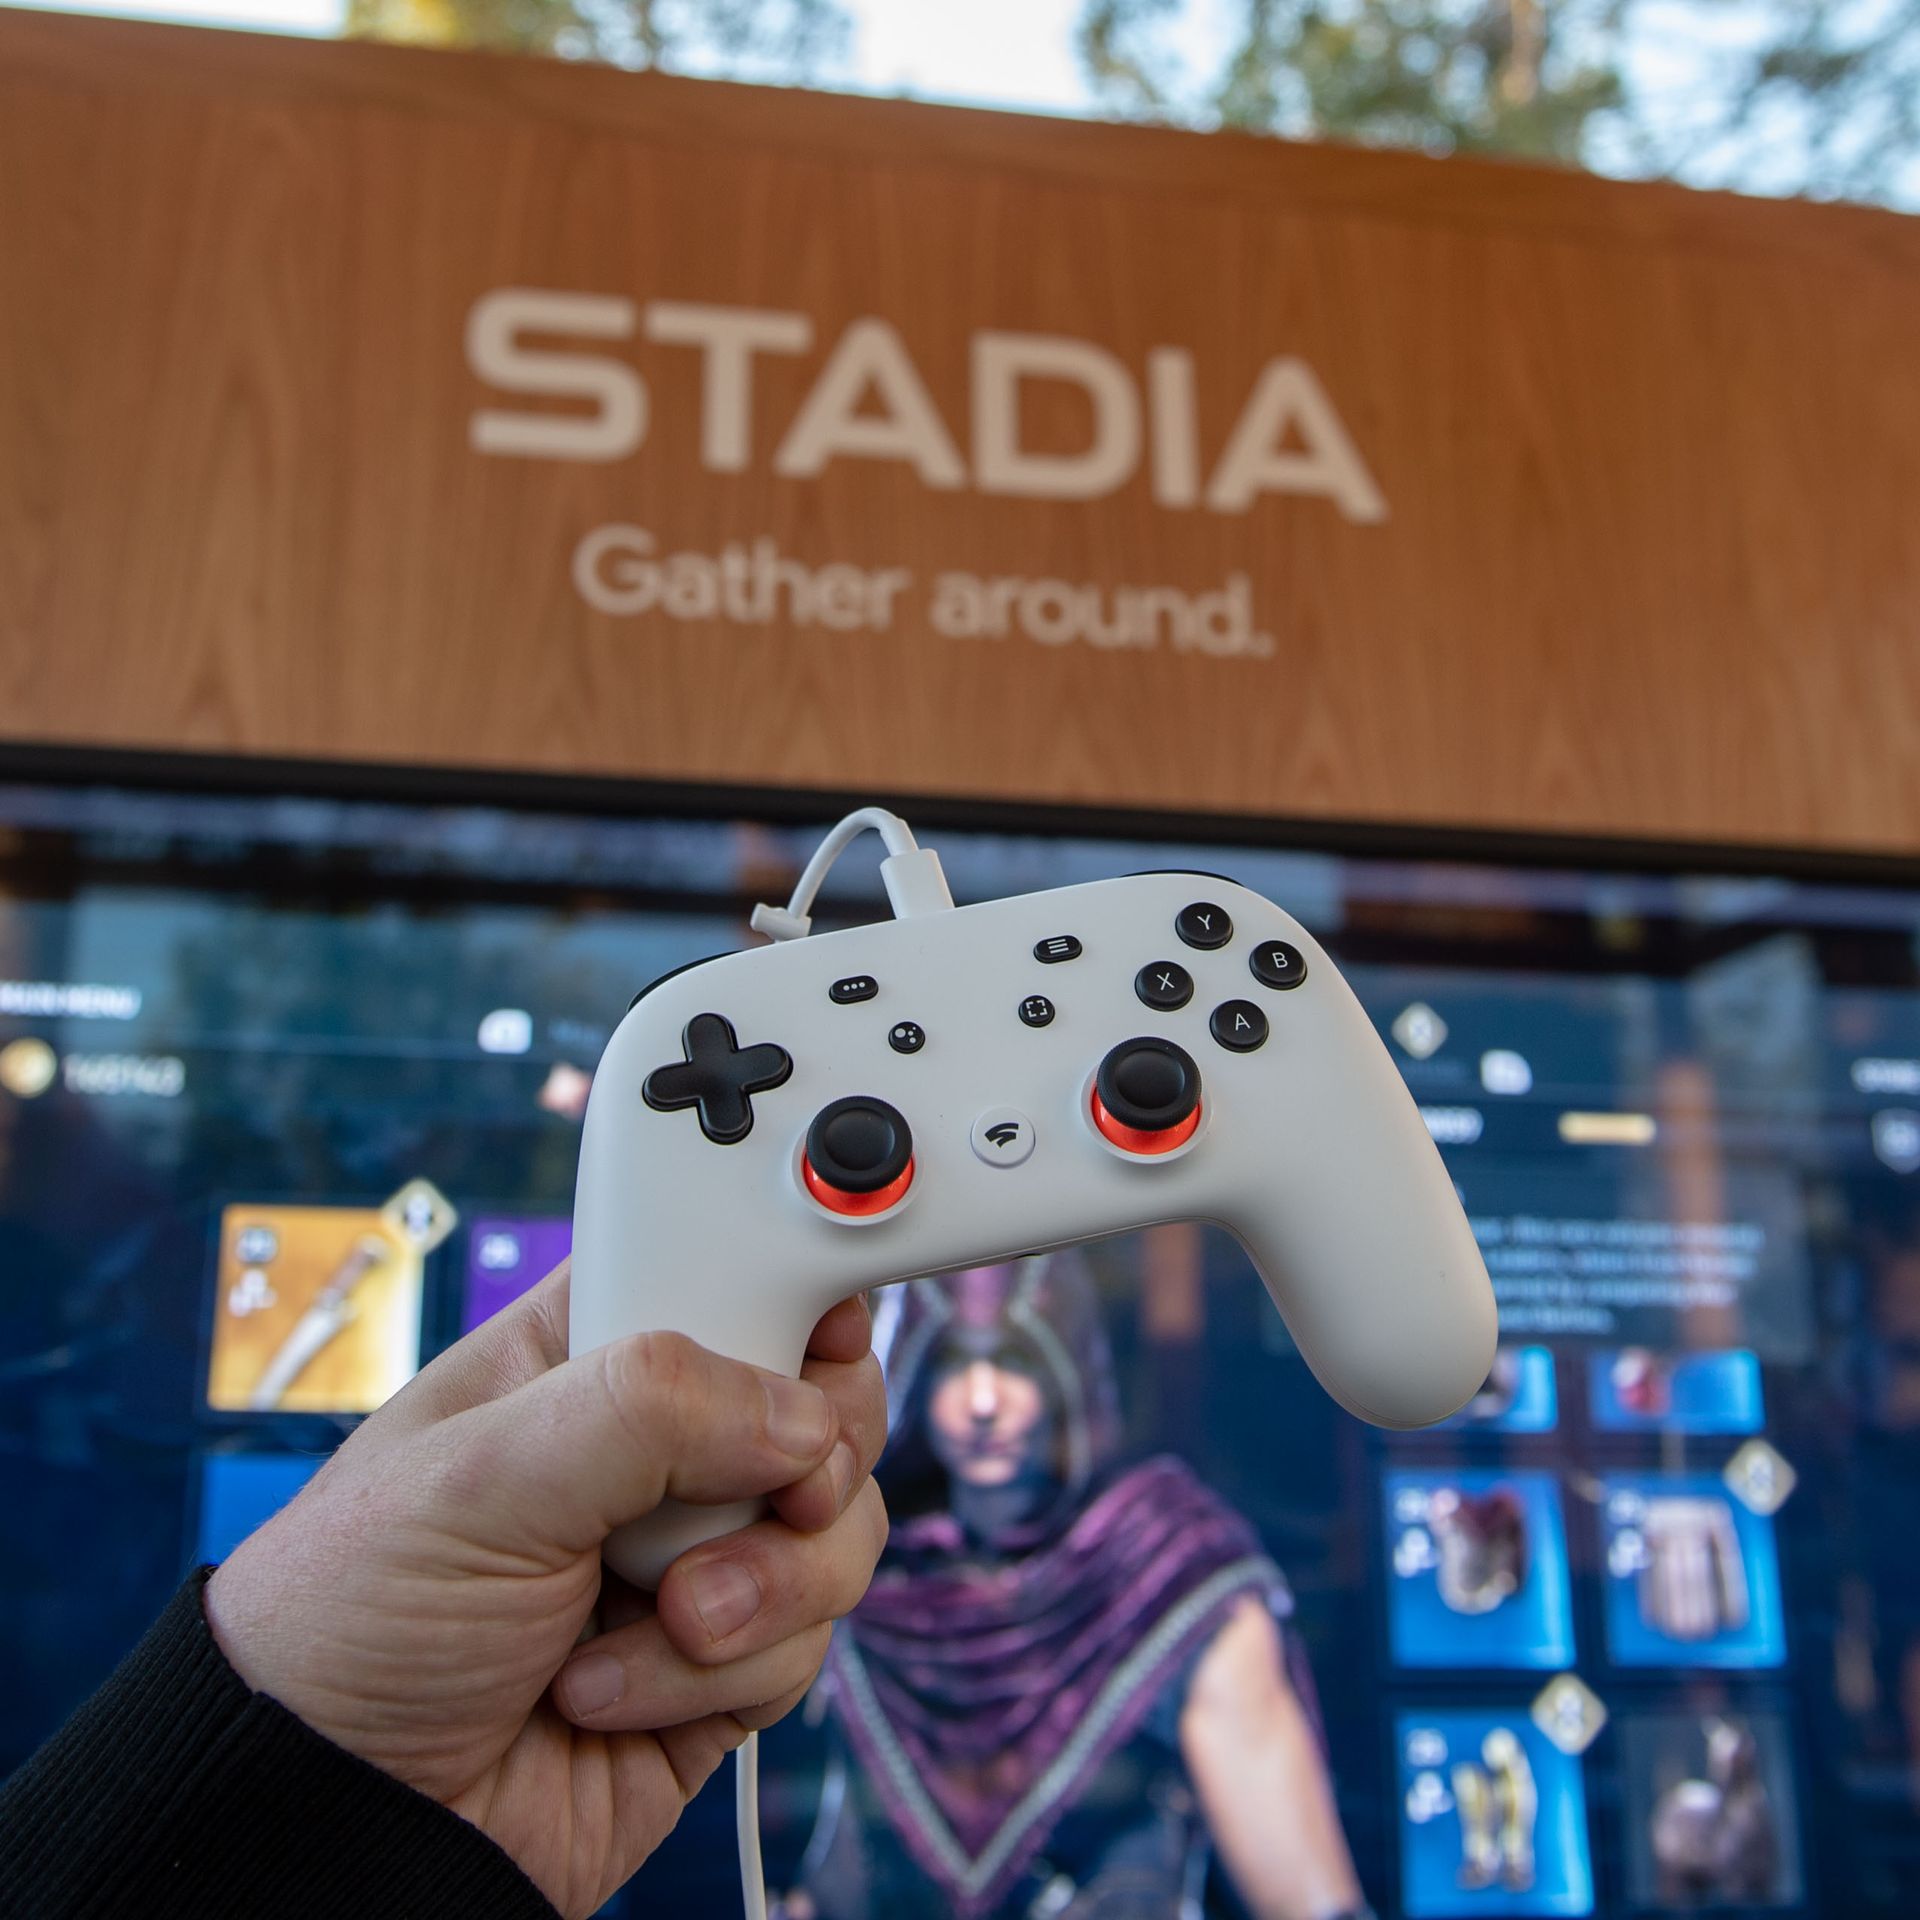 Google Makes Stadia Gaming Service Free - The New York Times